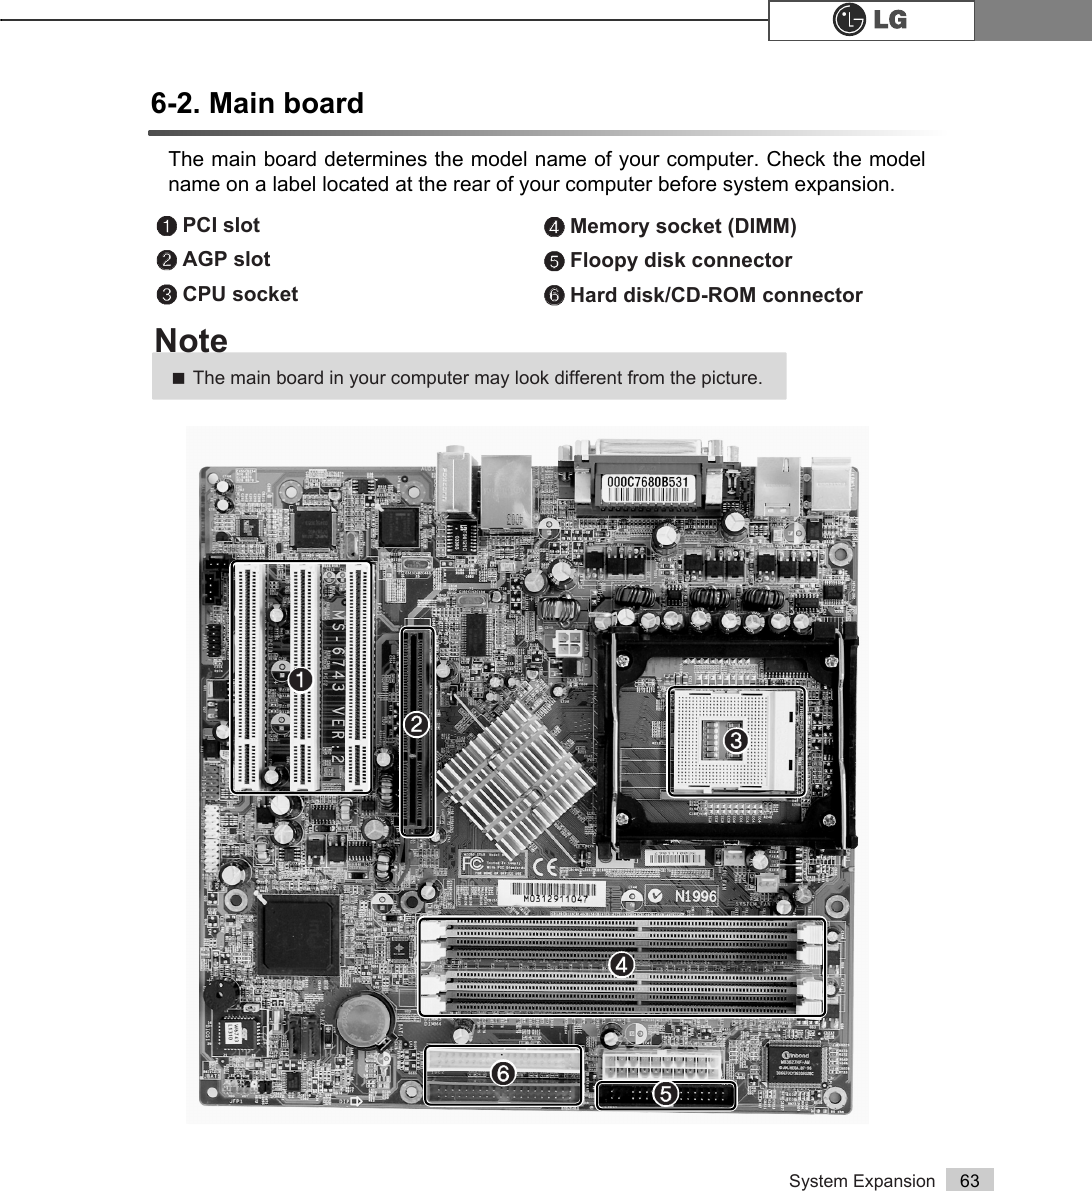 System Expansion 636-2. Main boardThe main board determines the model name of your computer. Check the modelname on a label located at the rear of your computer before system expansion.℘PCI slotℙℙAGP slotℚCPU socket ℛℛMemory socket (DIMM)ℜFloopy disk connectorℝℝHard disk/CD-ROM connectorก฀ขฃฅคãThe main board in your computer may look different from the picture.Note